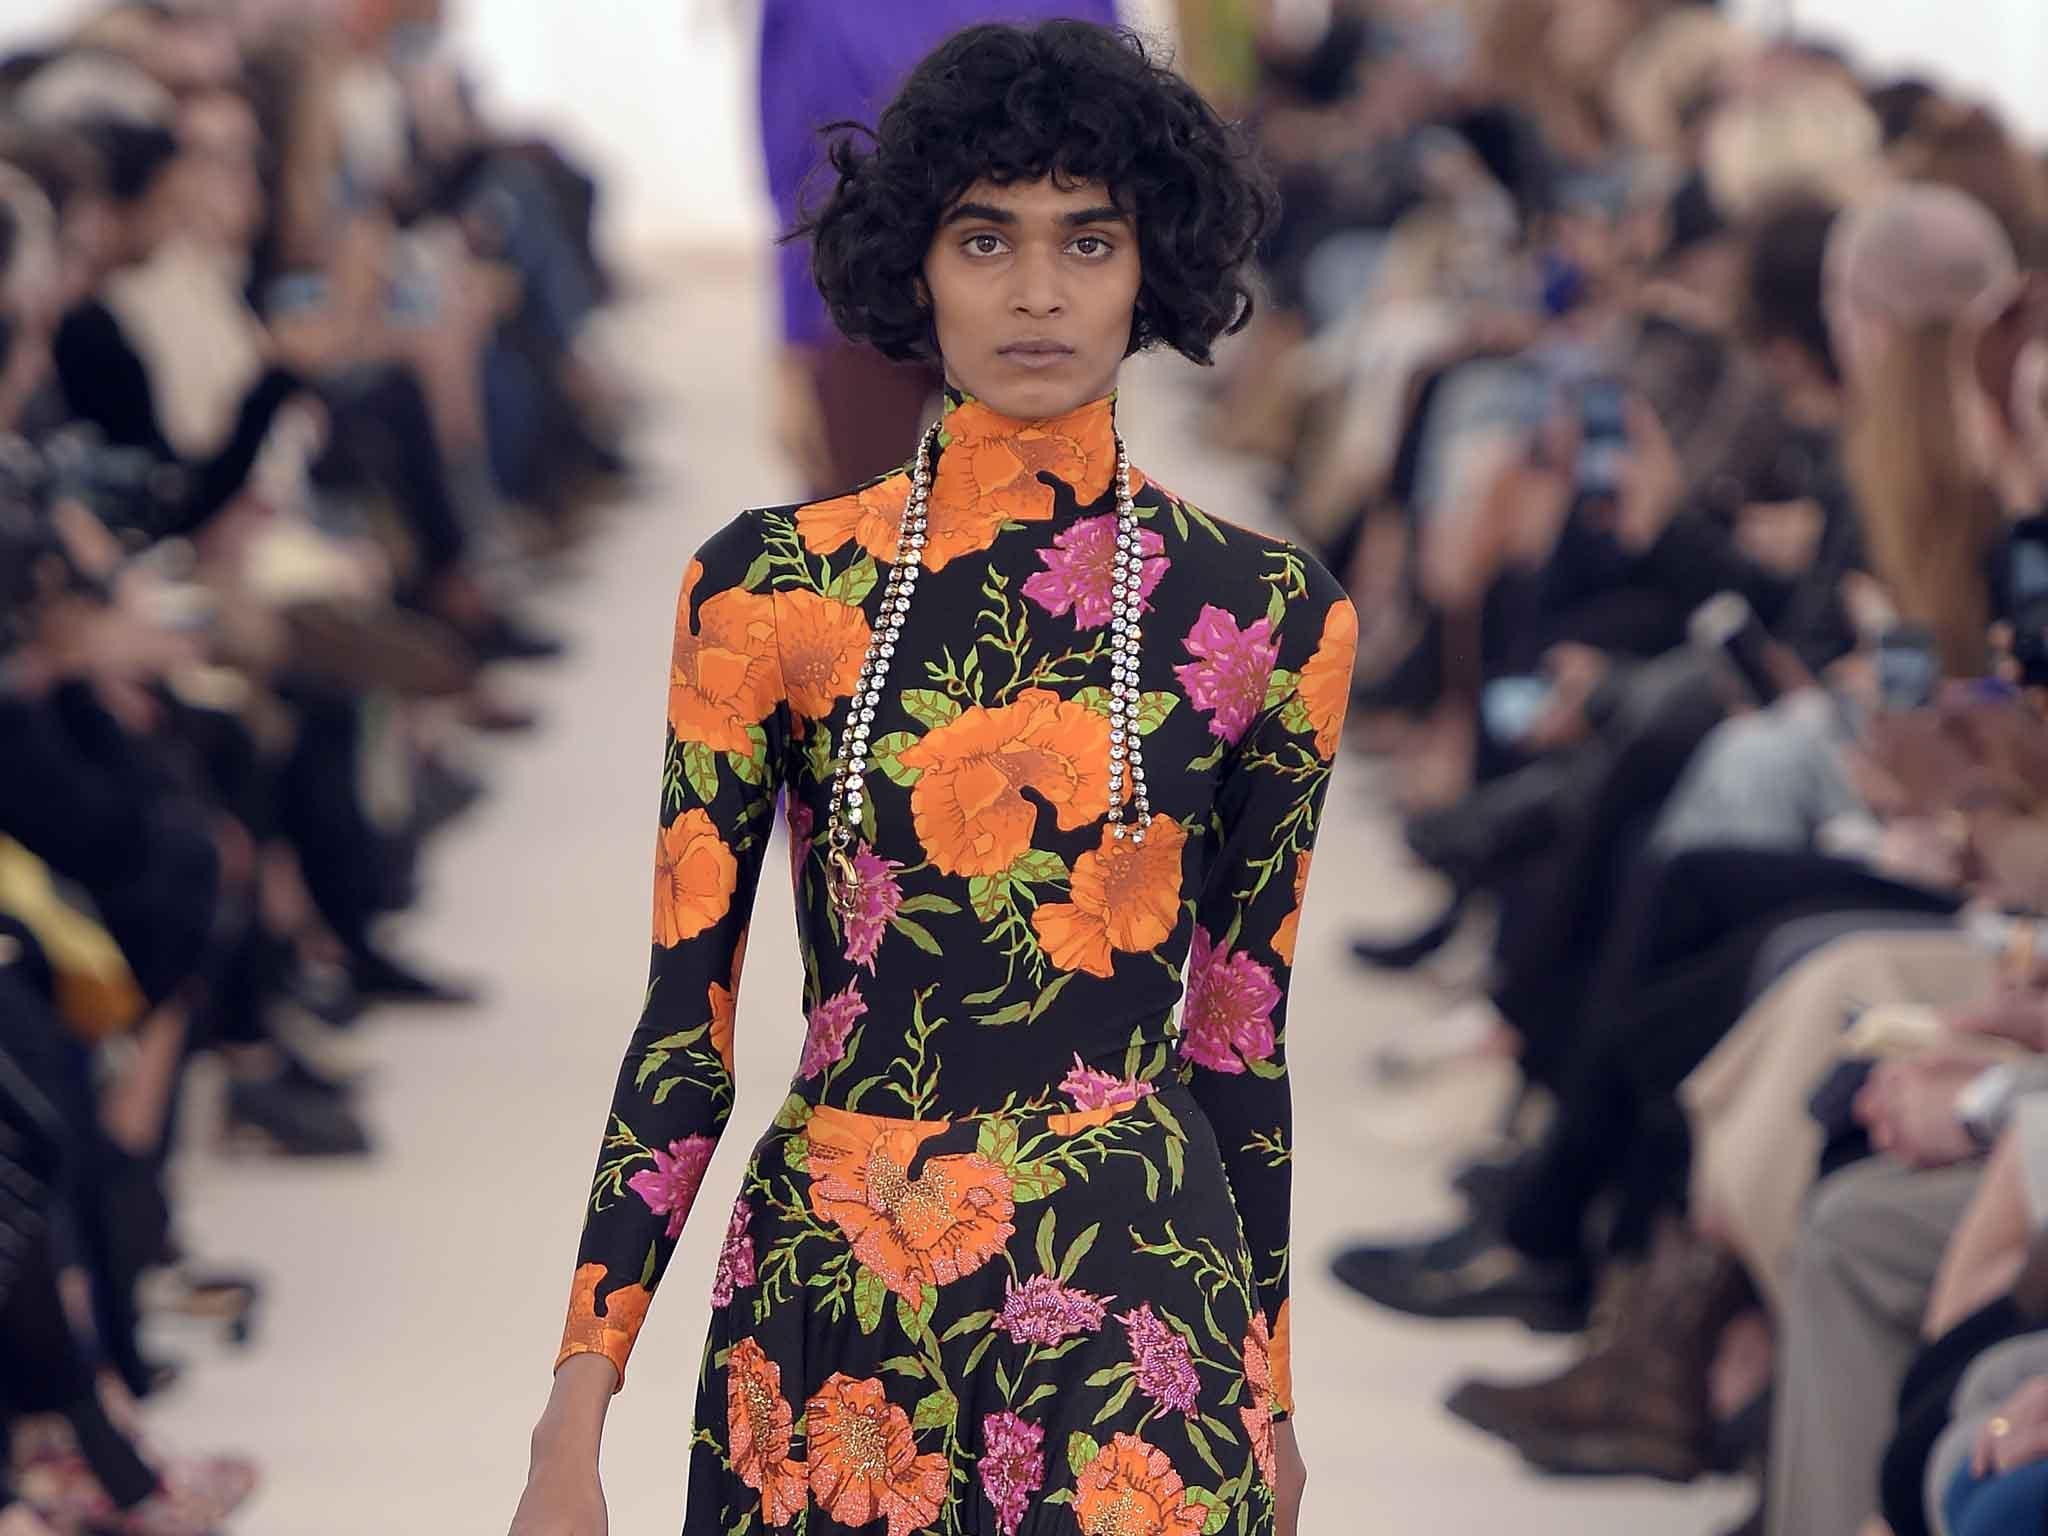 At Balenciaga there were big, brash neon carnations for spring/summer 2017